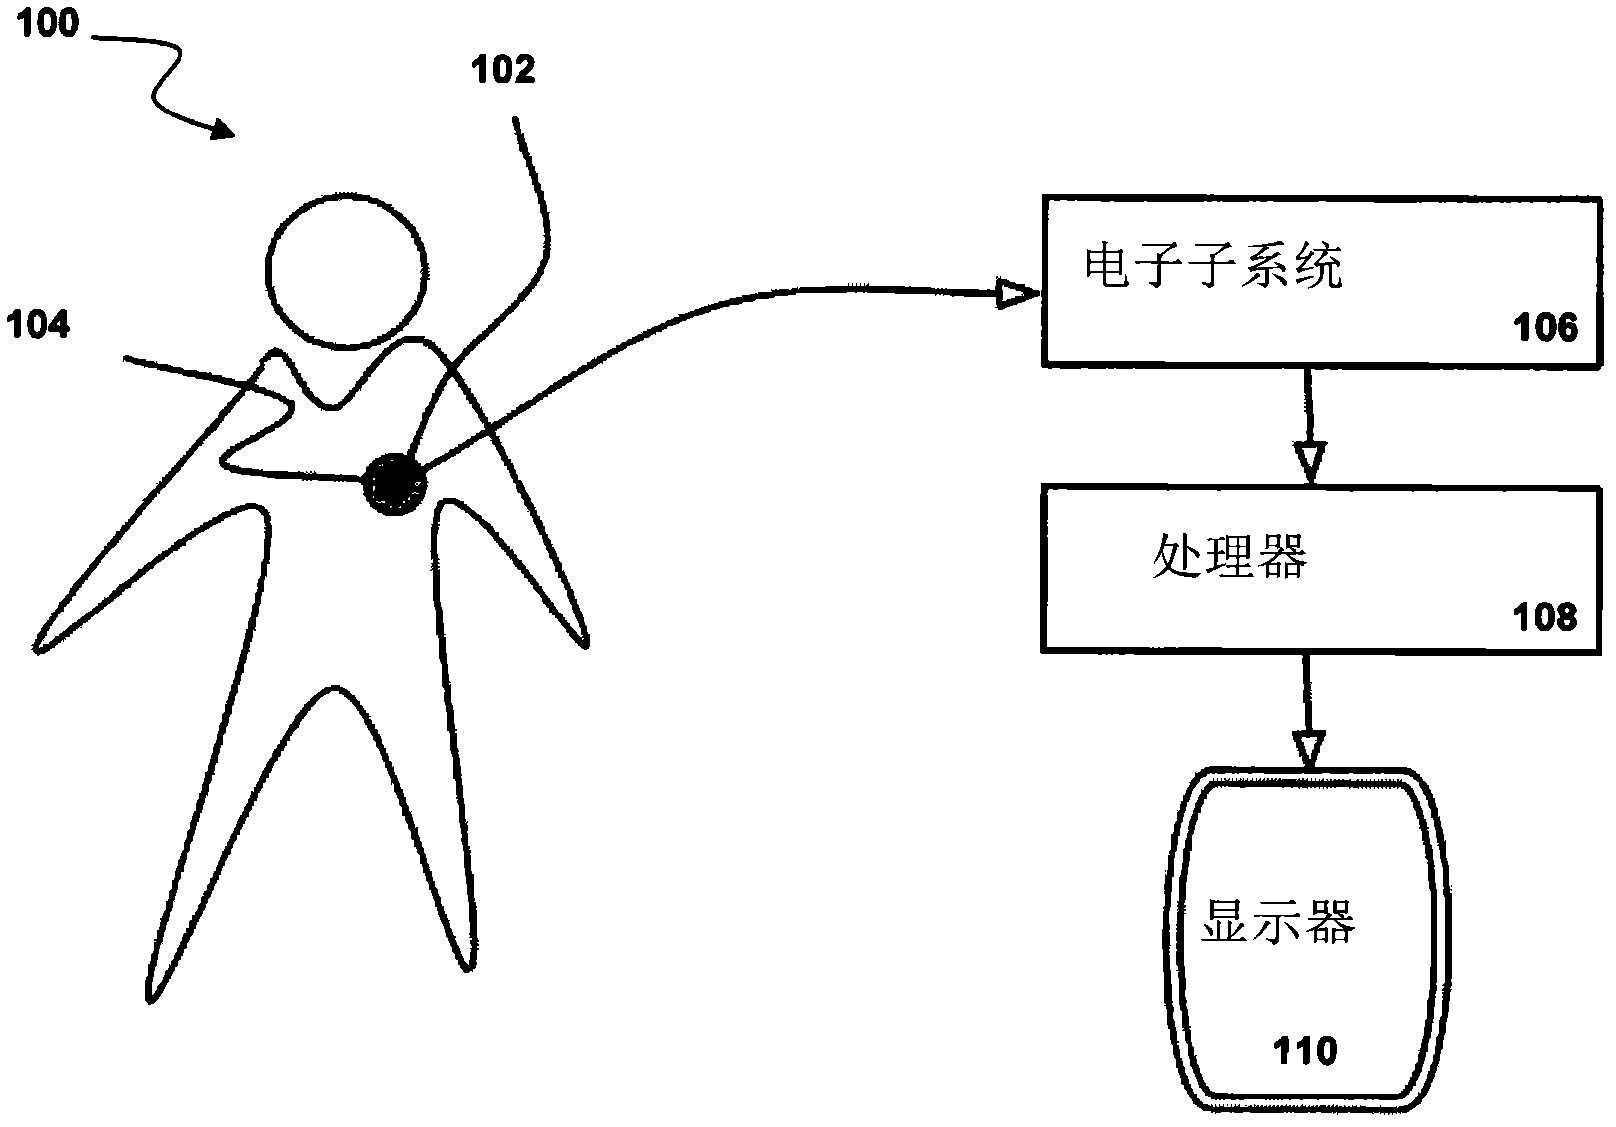 Systems and methods for detecting cardiovascular disease